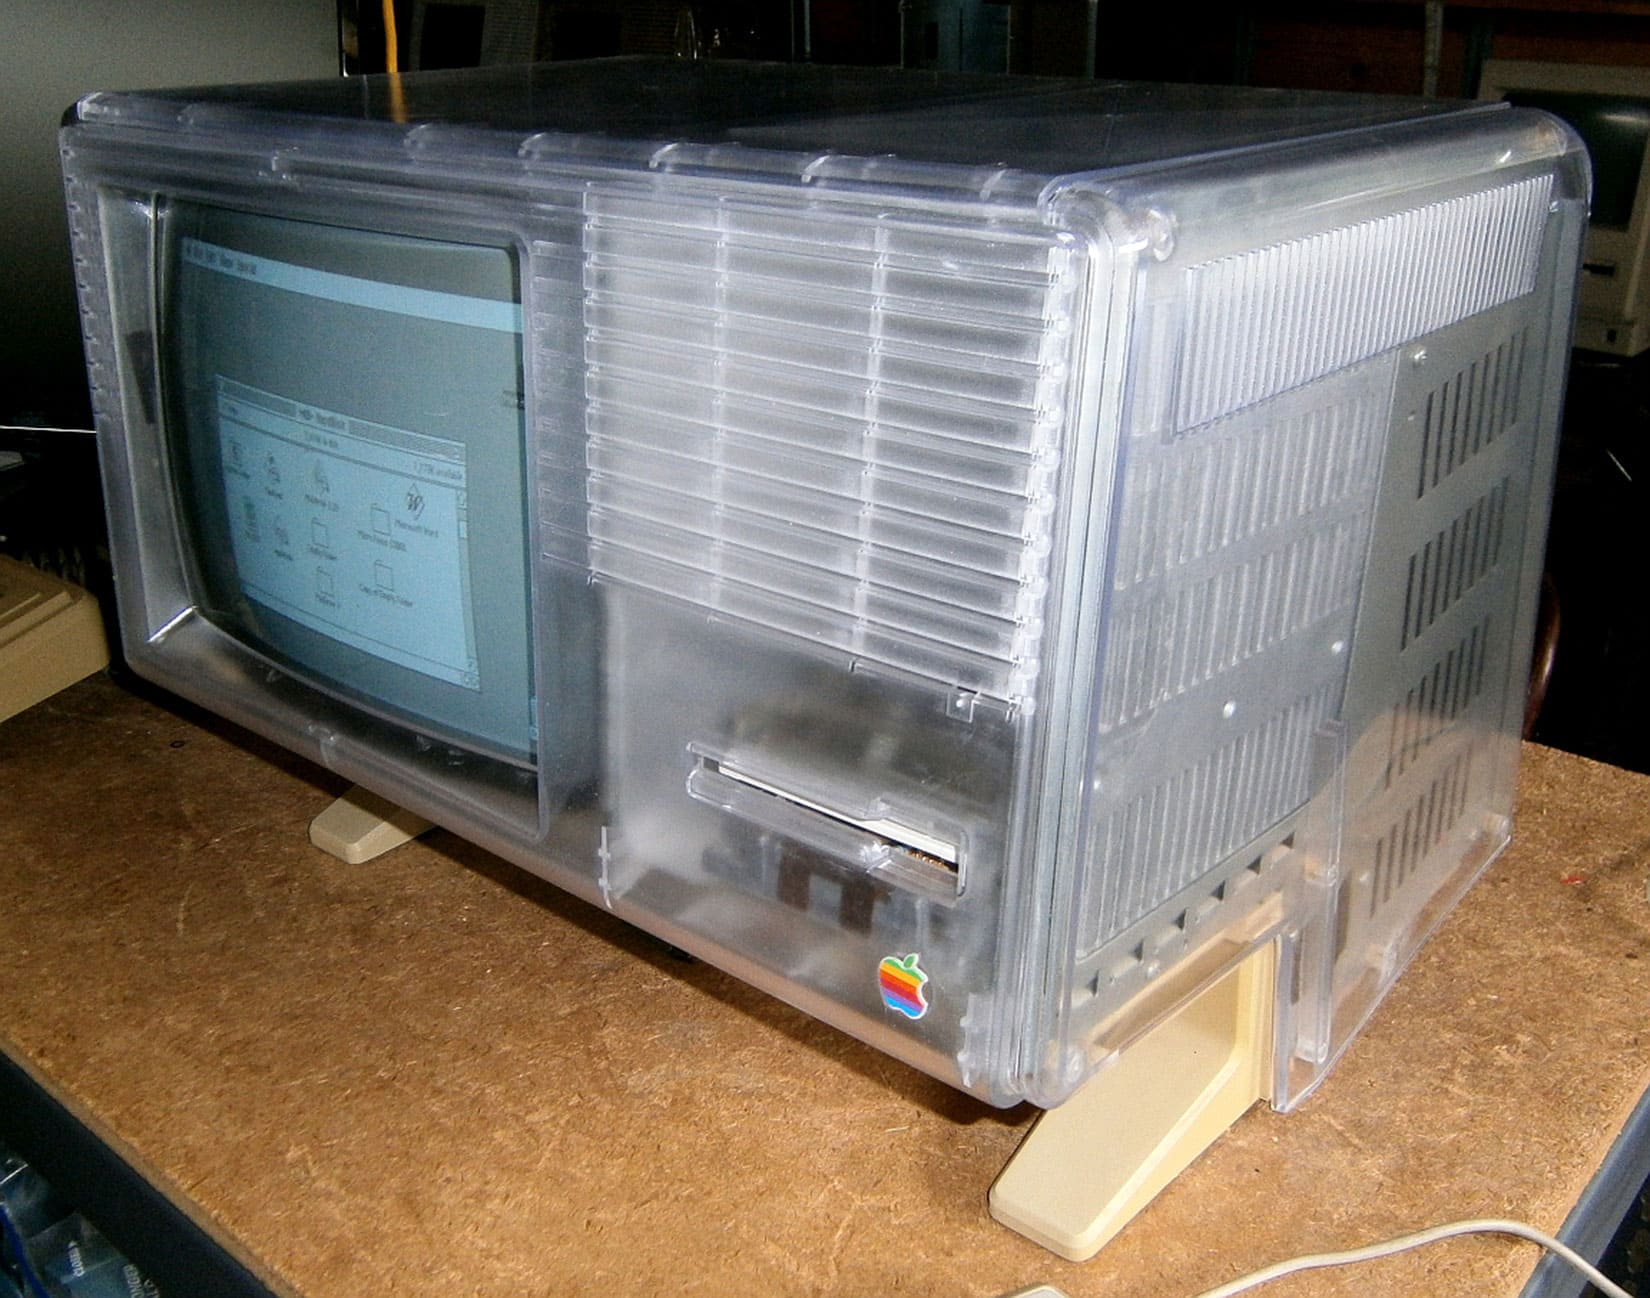 restored Apple Lisa with clear plastic housing